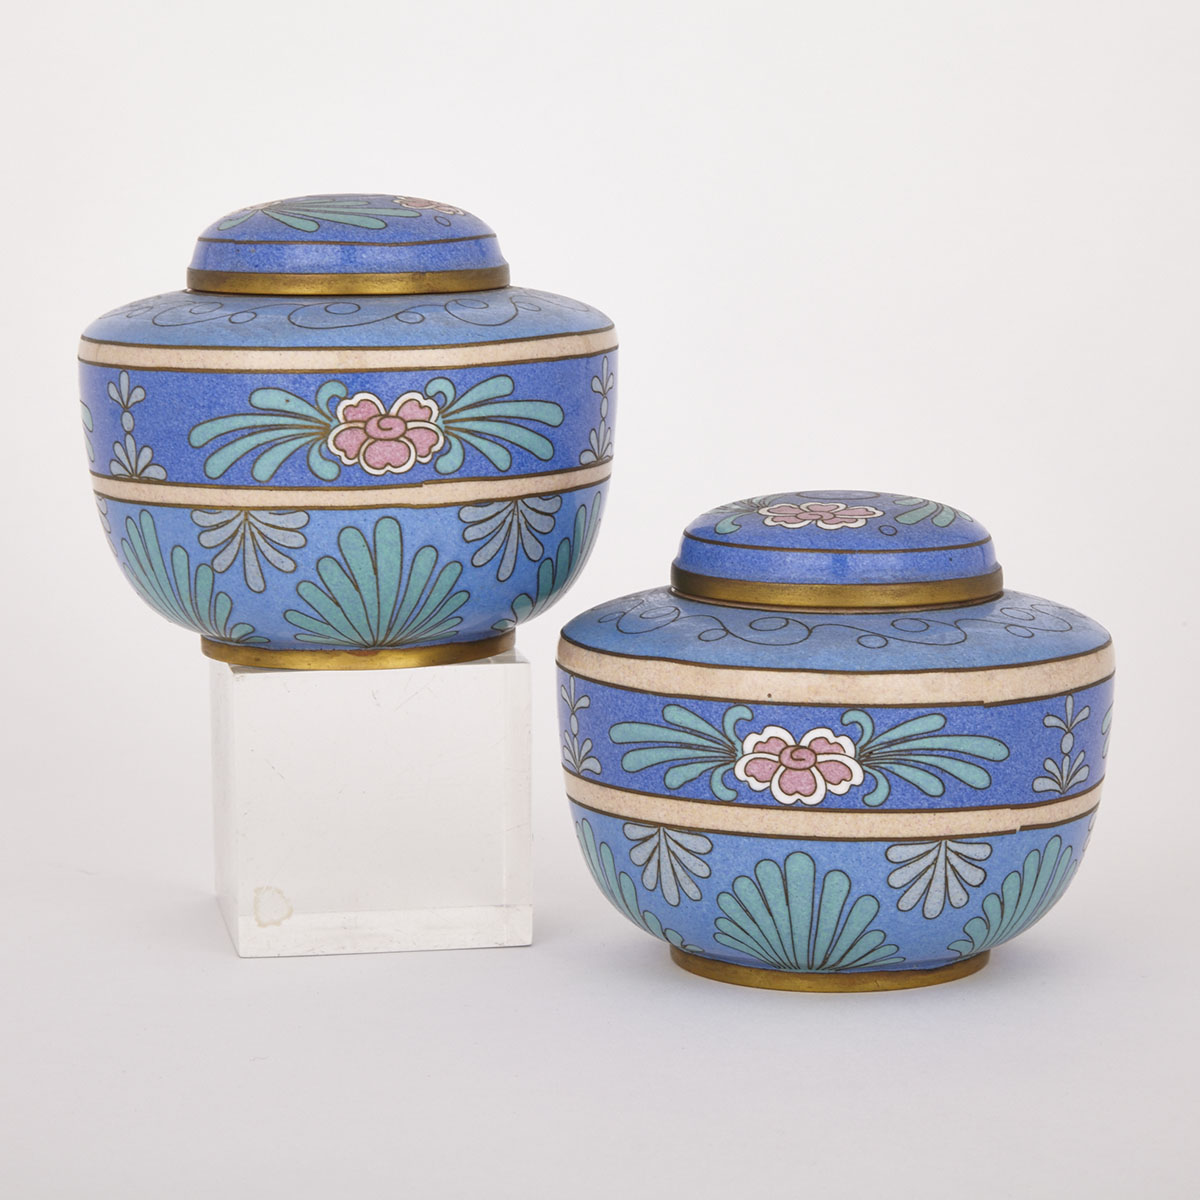 Pair of Japanese Cloisonne Covered Jars